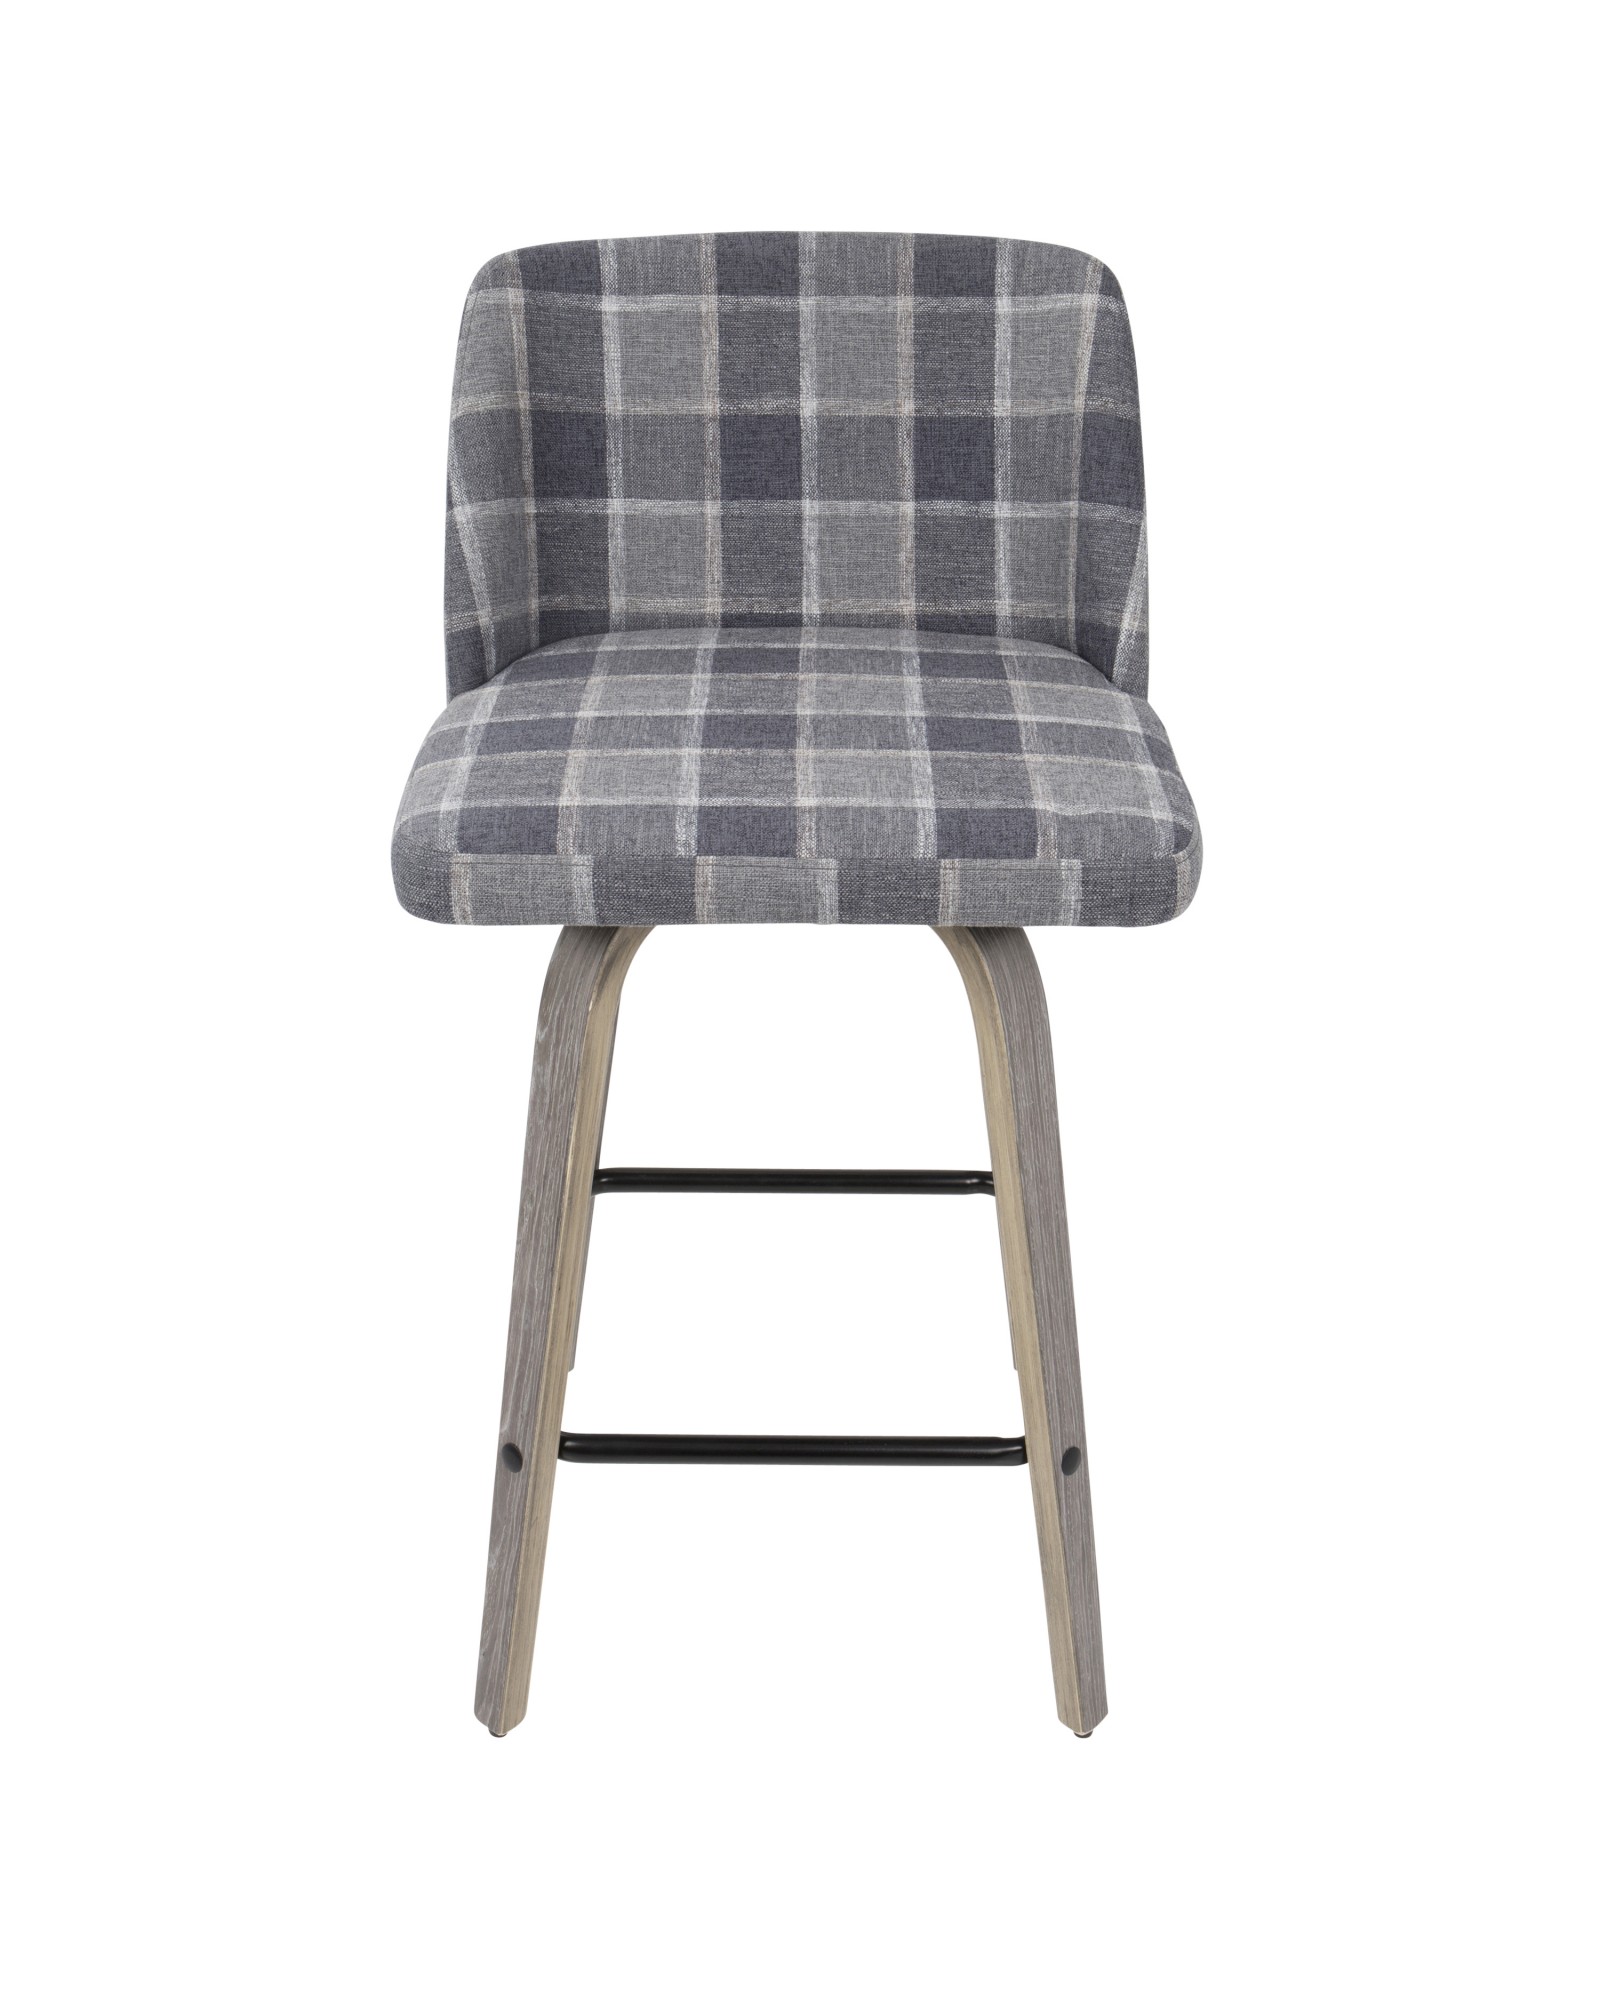 Toriano Mid-Century Modern Counter Stool in Light Grey Wood and Blue Plaid